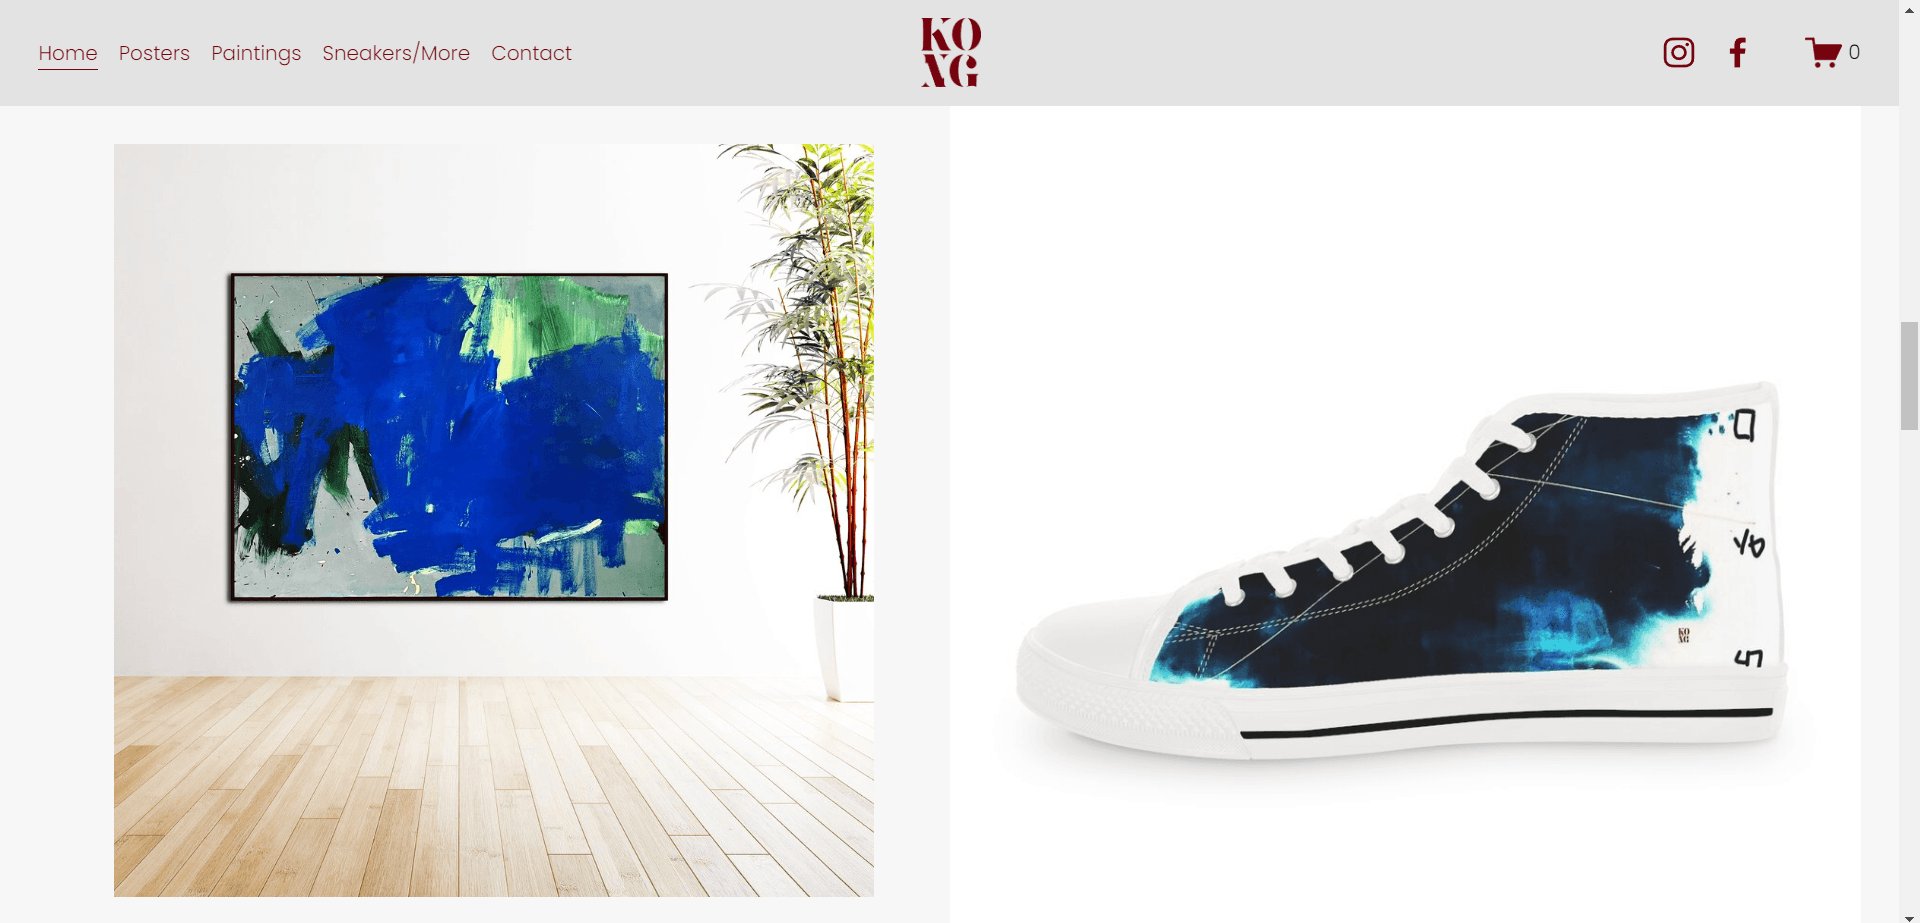 Large displays of featured products on home page, a painting on the left and sneaker on the right